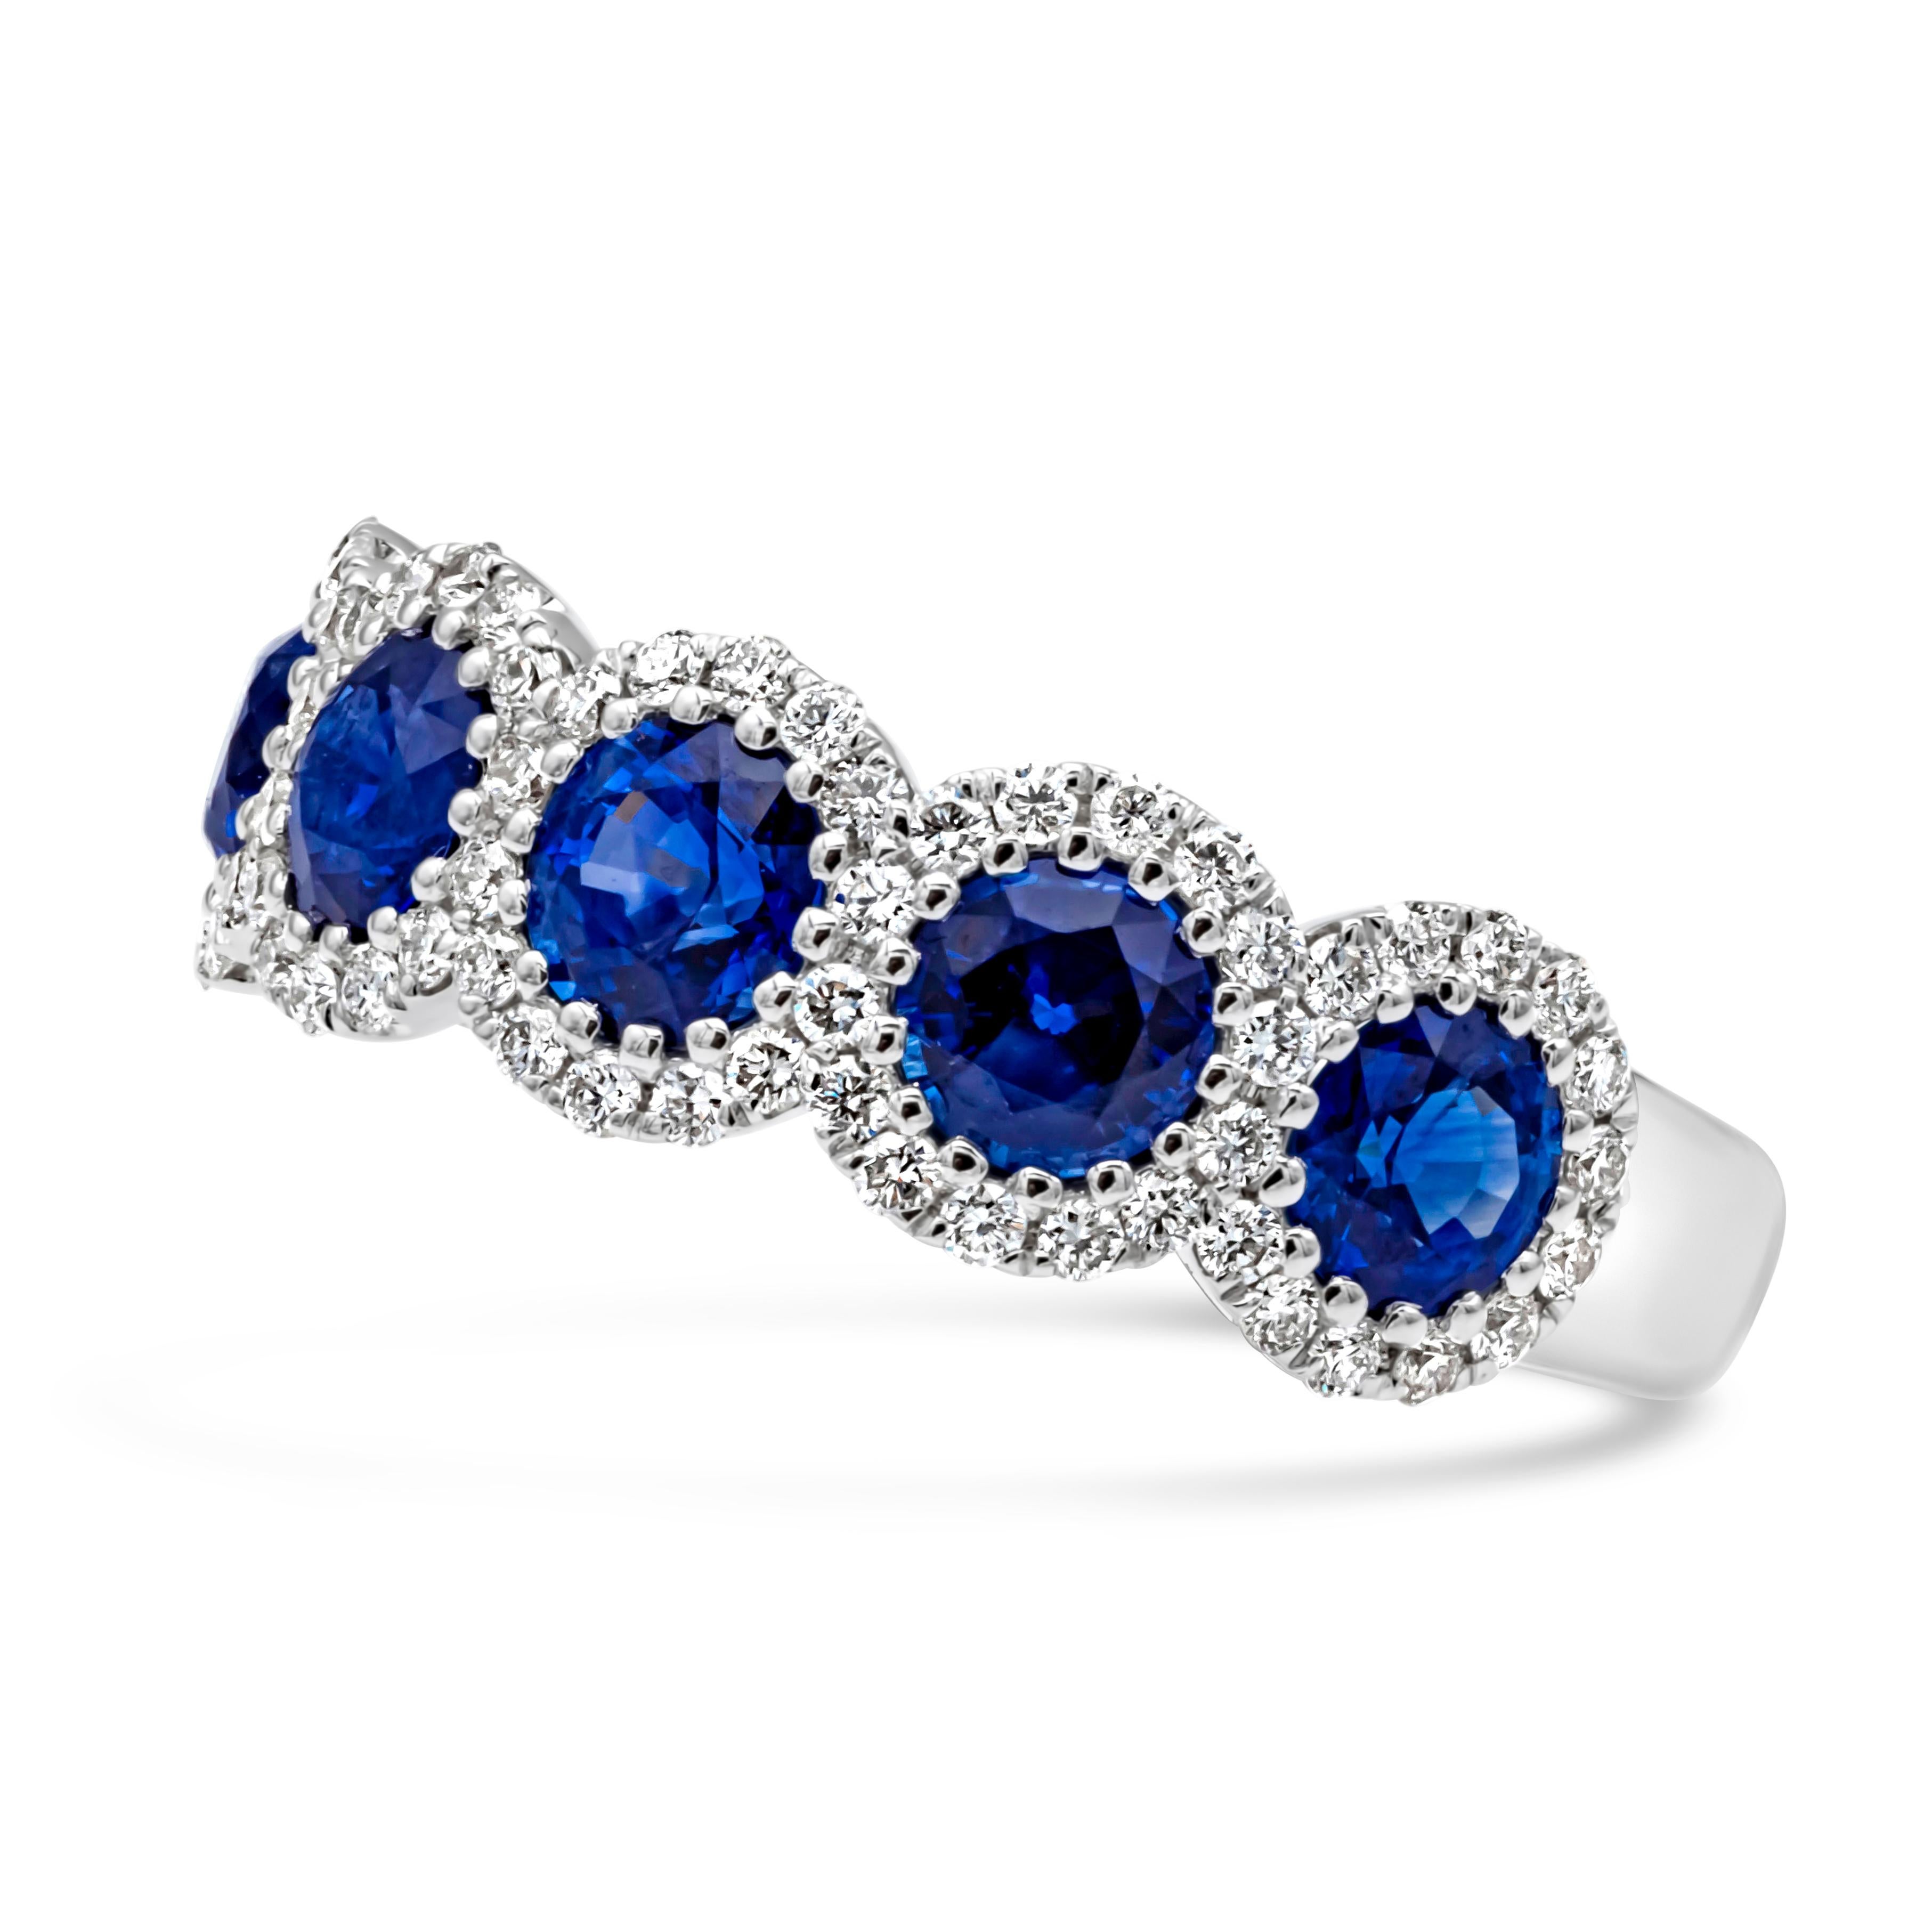 A classic and brilliant wedding band featuring five brilliant round cut blue sapphires weighing 1.88 carats total, set in a timeless fourteen prong basket setting and each round cut blue sapphires are surrounded by brilliant round diamonds weighing